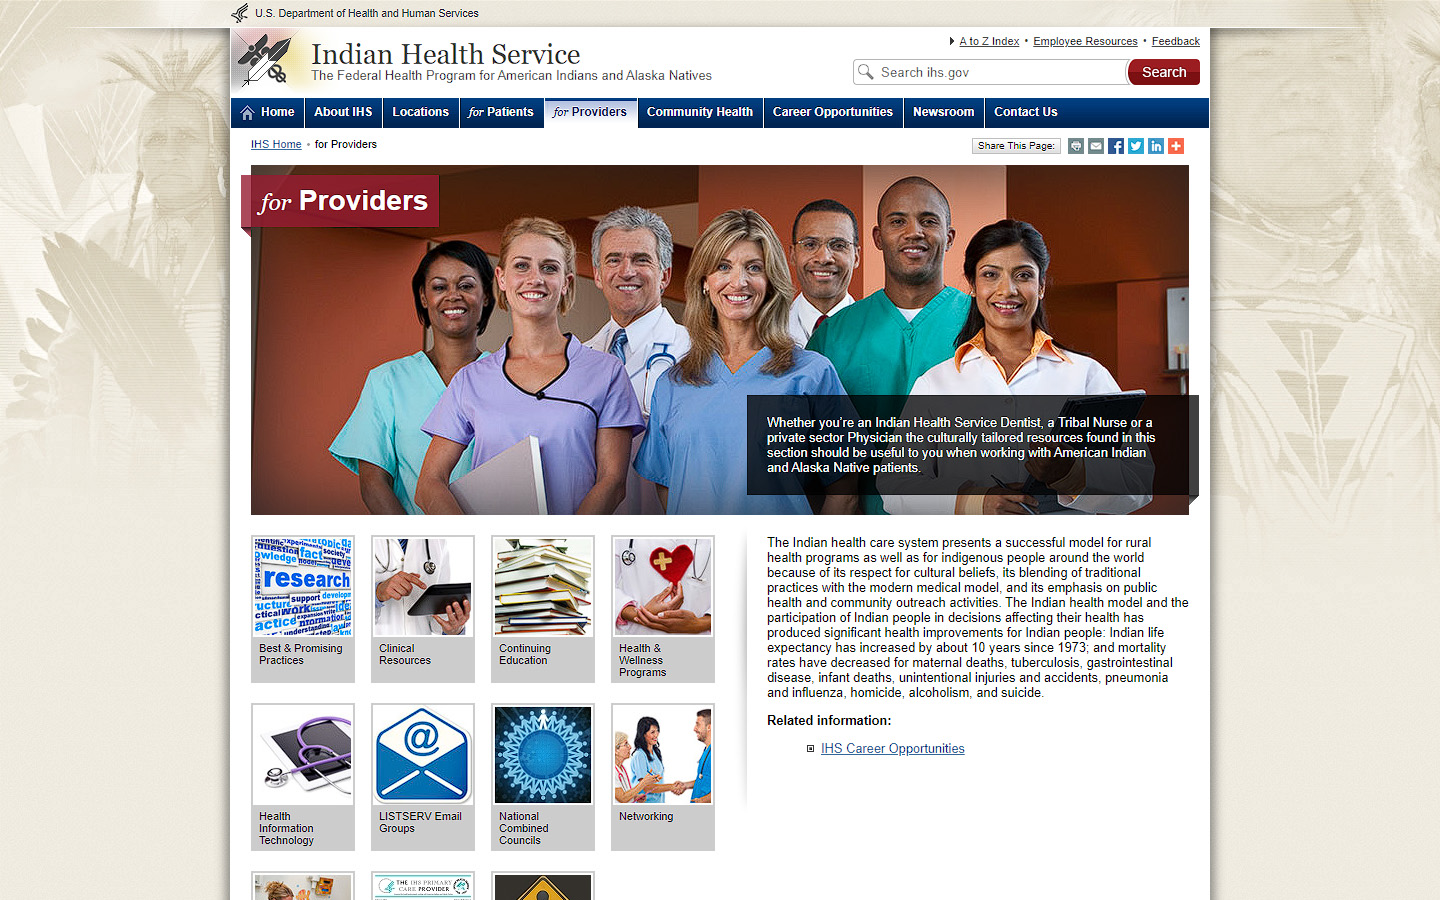 ihs.gov providers page